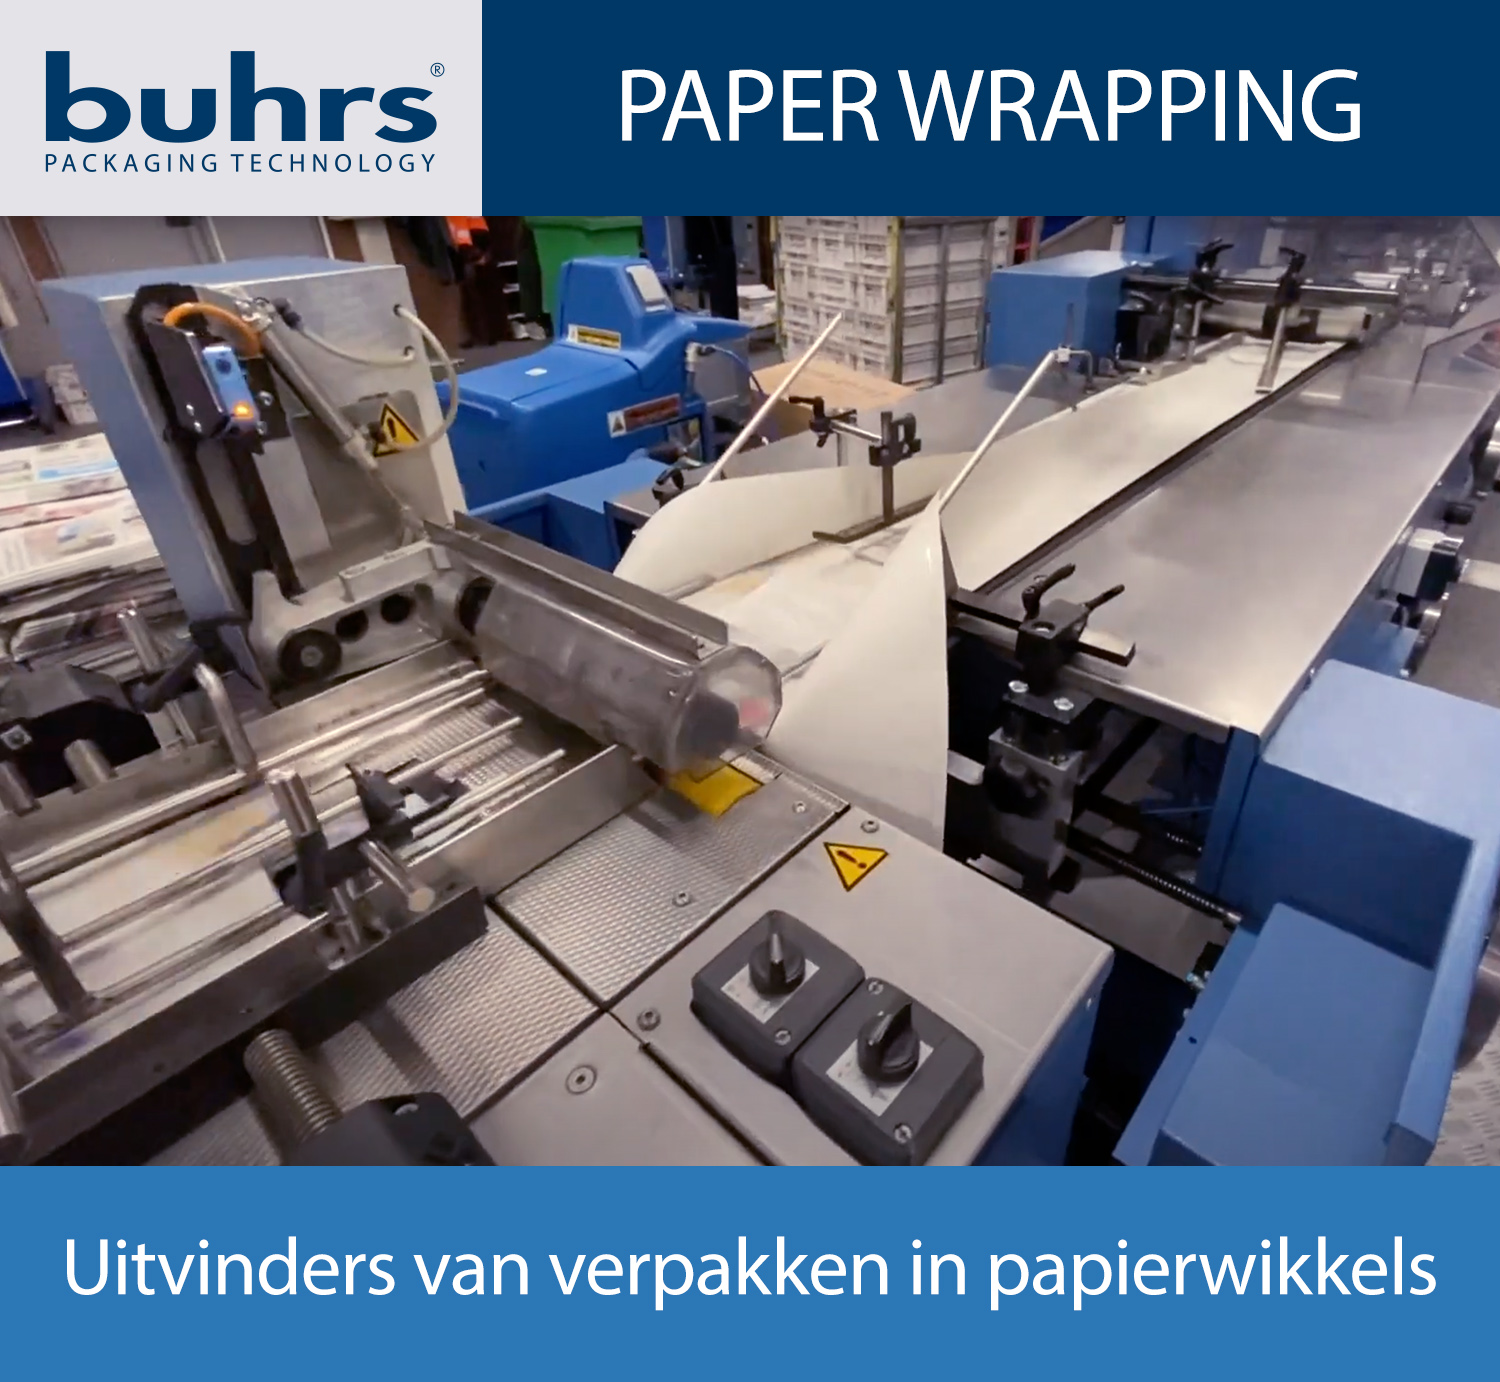 Visual-Buhrs-Paper-Wrapping-NL-21.03.jpg